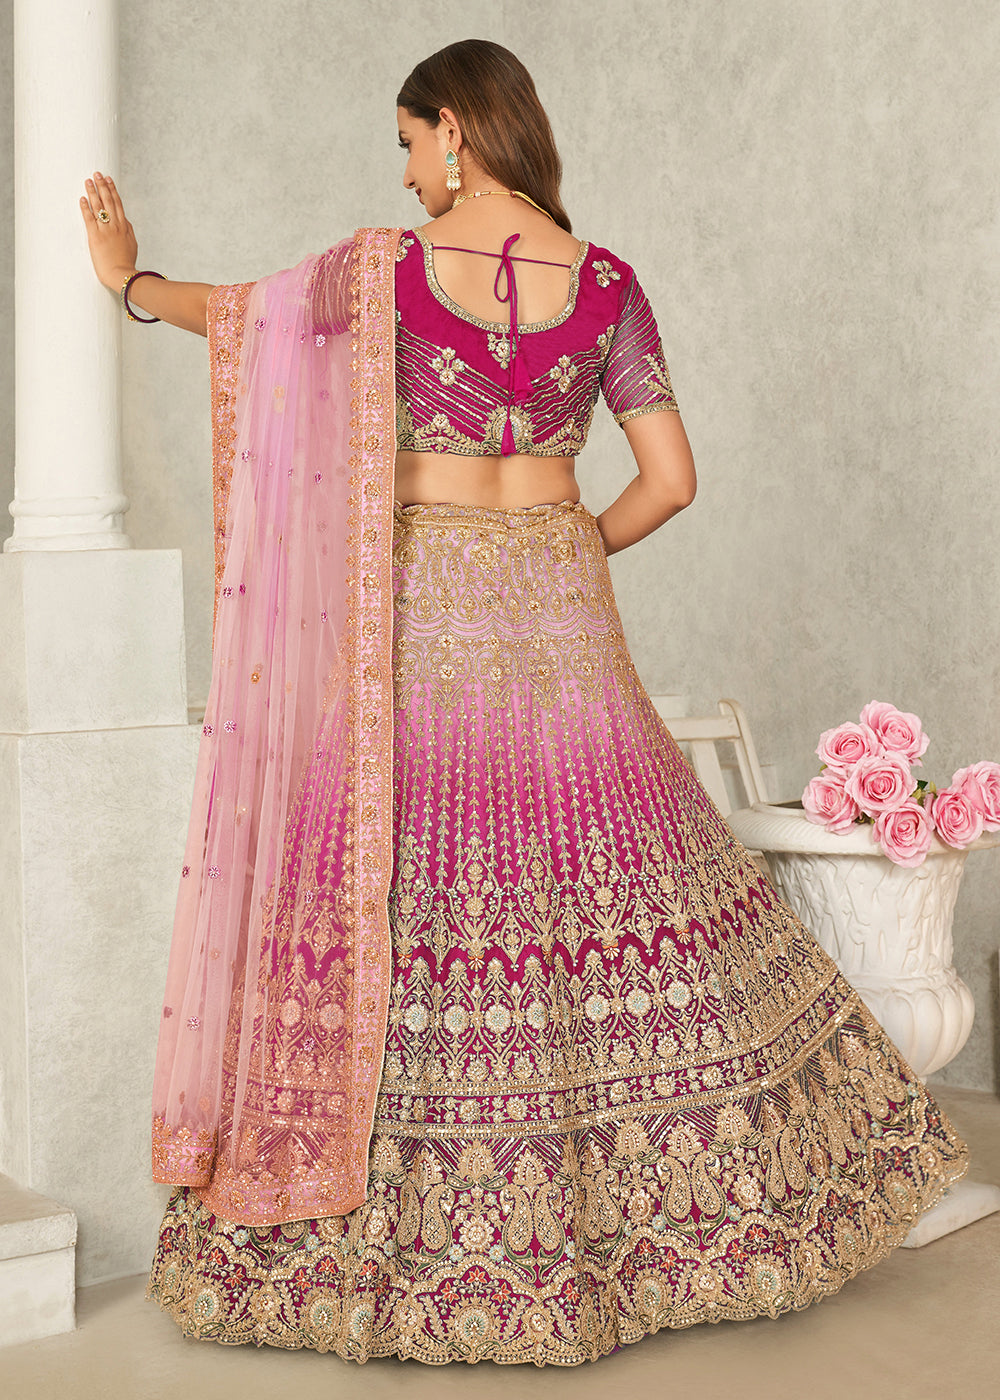 Buy Now Pink Wedding Style Embroidered A Line Lehenga Choli Online in USA, UK, Canada & Worldwide at Empress Clothing.